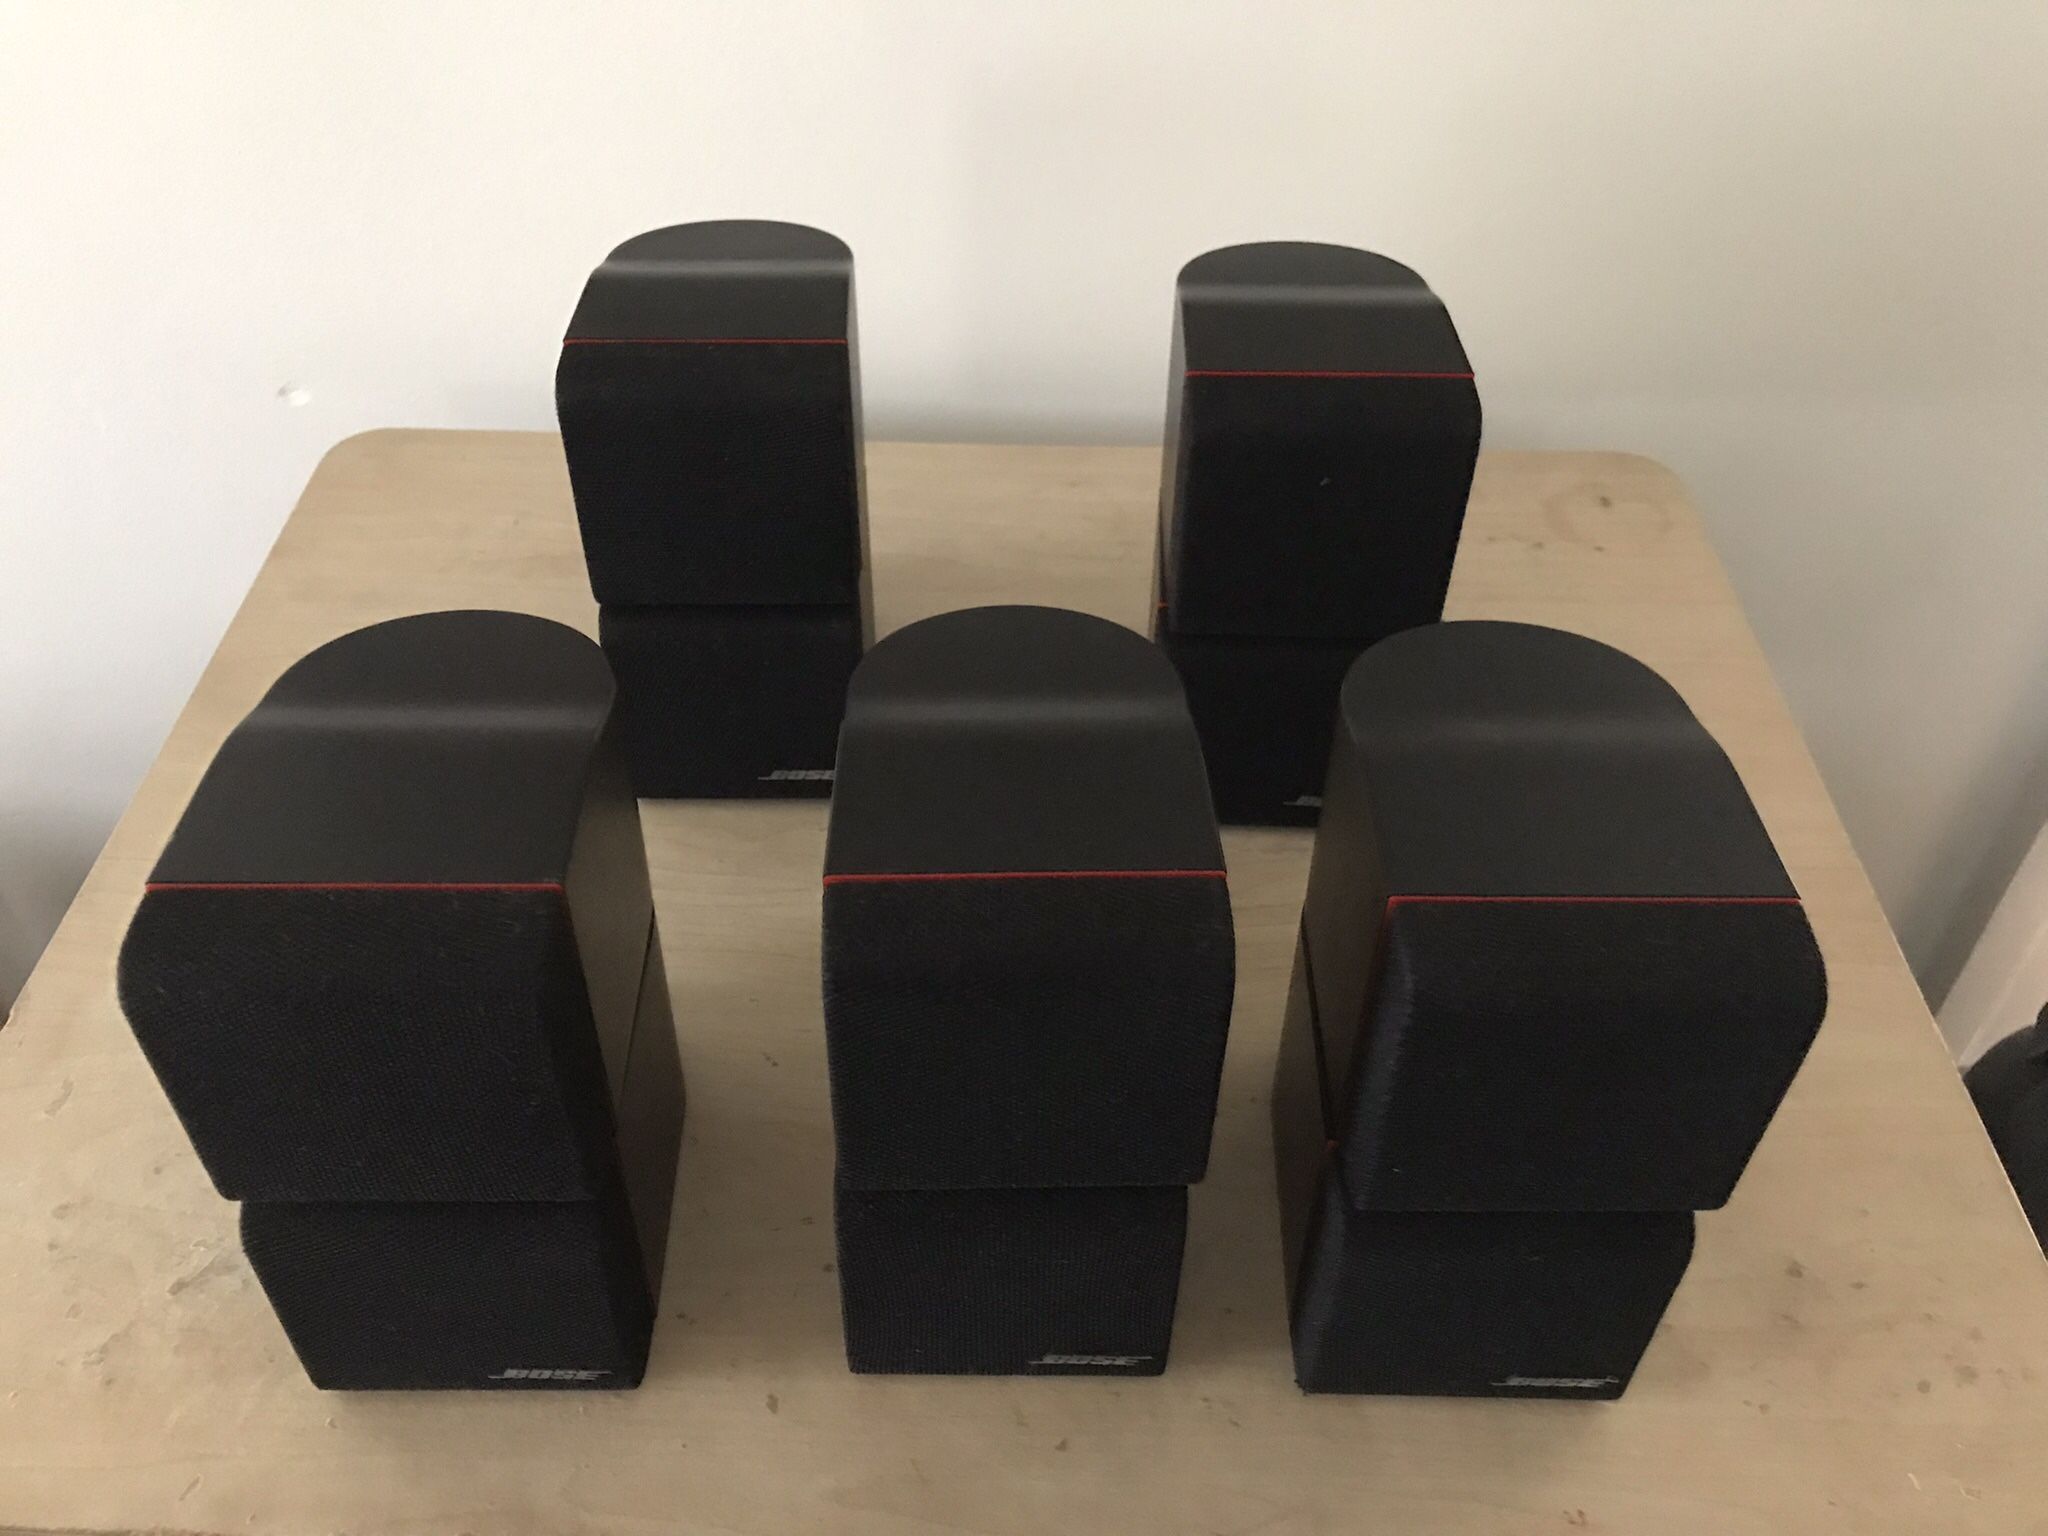 Bose Red Line Cube Speakers